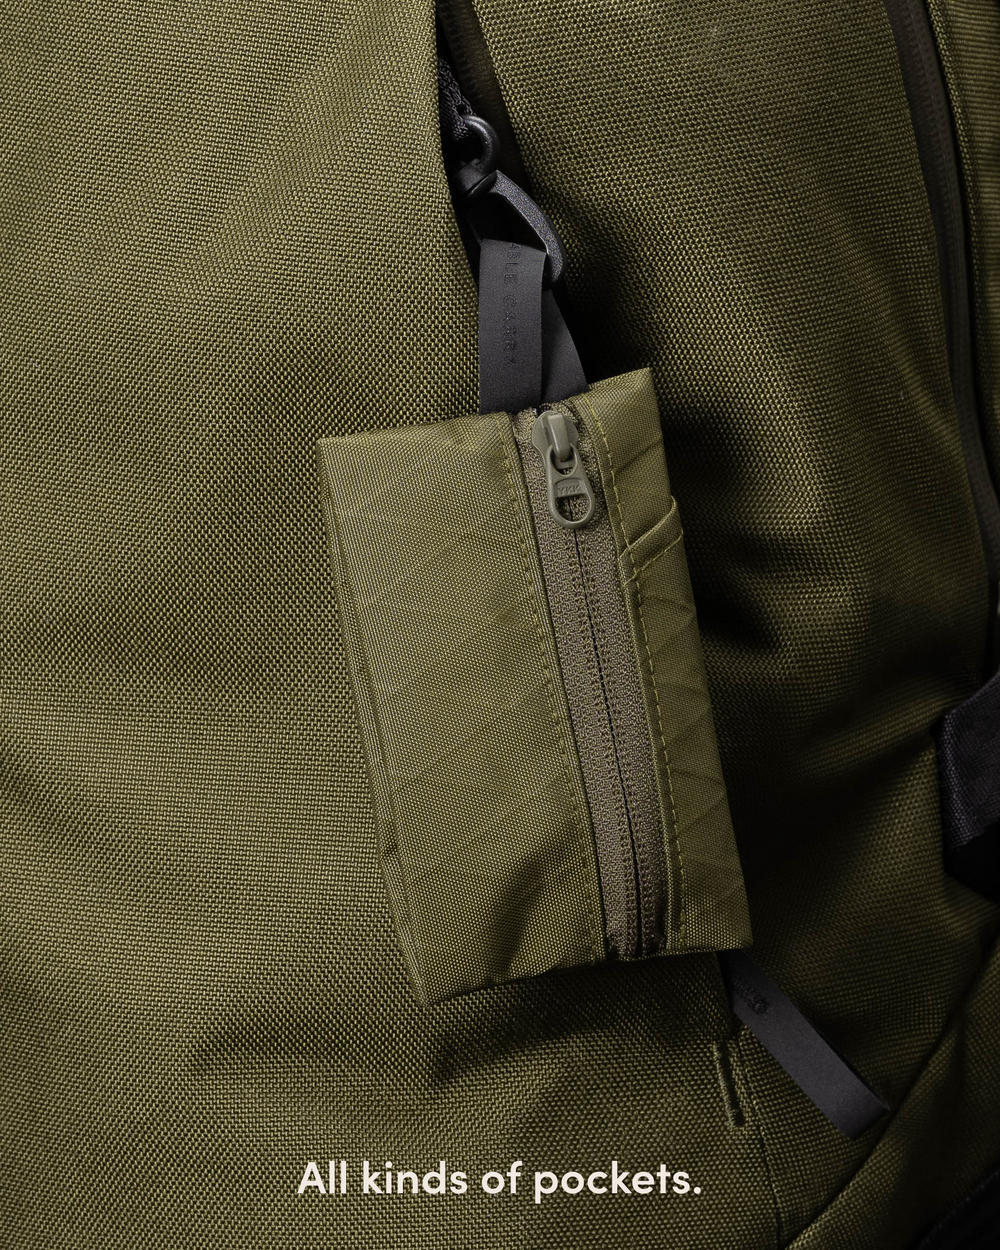 Joey Pouch by Able Carry - Storming Gravity